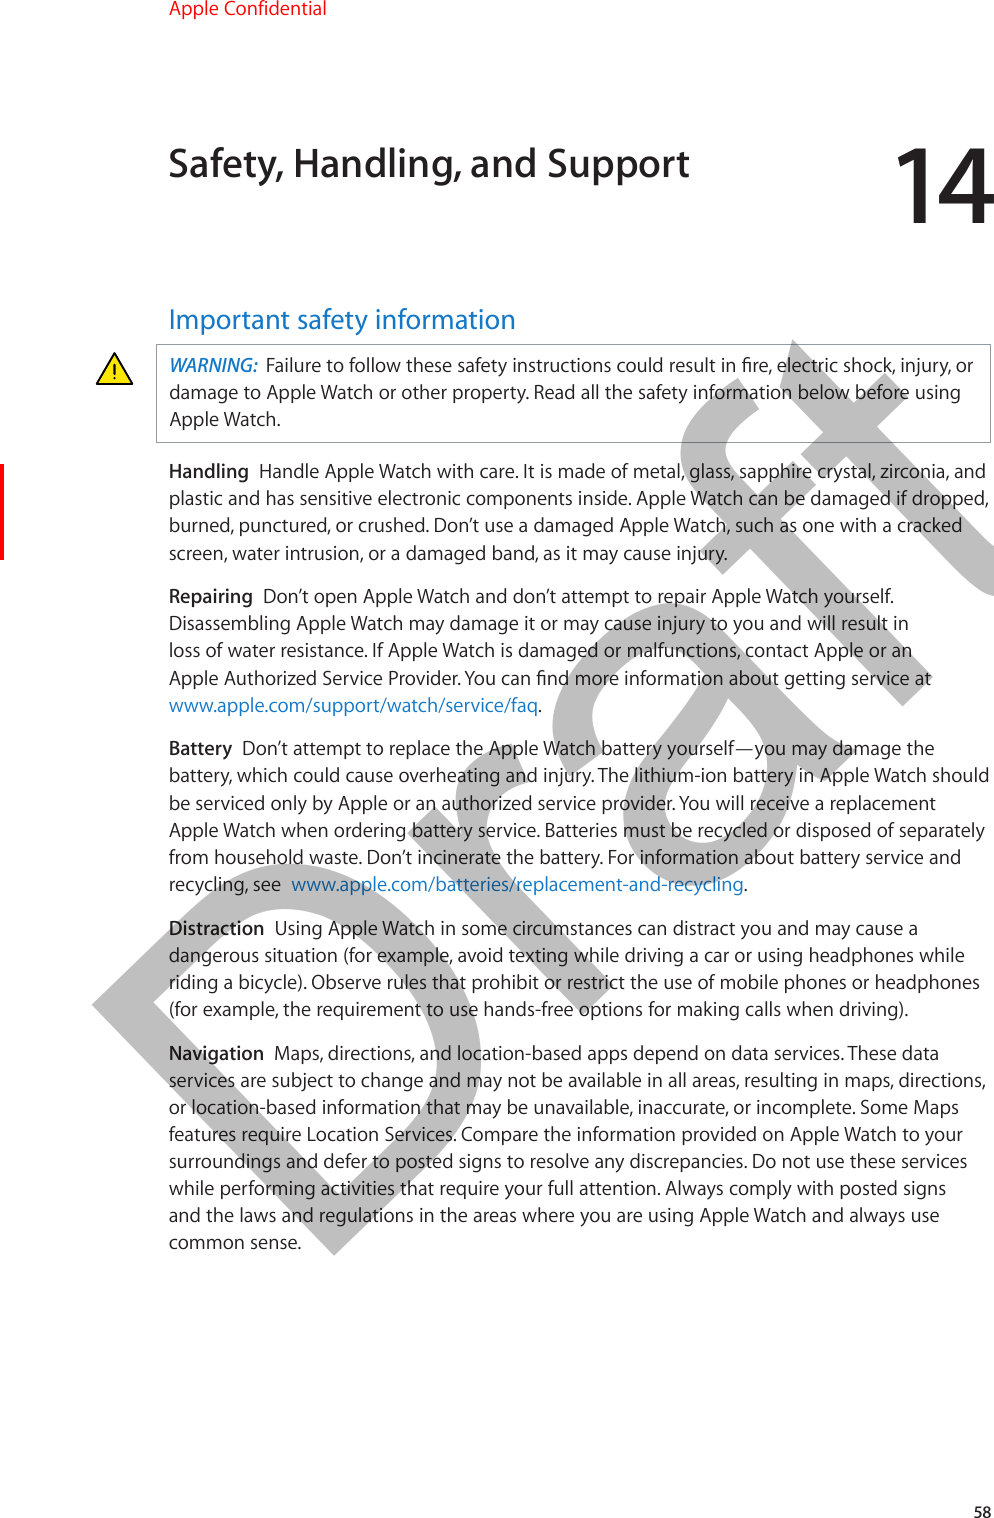 1458Important safety informationWARNING:  Failure to follow these safety instructions could result in re, electric shock, injury, or damage to Apple Watch or other property. Read all the safety information below before using Apple Watch.Handling  Handle Apple Watch with care. It is made of metal, glass, sapphire crystal, zirconia, and plastic and has sensitive electronic components inside. Apple Watch can be damaged if dropped, burned, punctured, or crushed. Don’t use a damaged Apple Watch, such as one with a cracked screen, water intrusion, or a damaged band, as it may cause injury.Repairing  Don’t open Apple Watch and don’t attempt to repair Apple Watch yourself. Disassembling Apple Watch may damage it or may cause injury to you and will result in loss of water resistance. If Apple Watch is damaged or malfunctions, contact Apple or an Apple Authorized Service Provider. You can nd more information about getting service at www.apple.com/support/watch/service/faq.Battery  Don’t attempt to replace the Apple Watch battery yourself—you may damage the battery, which could cause overheating and injury. The lithium-ion battery in Apple Watch should be serviced only by Apple or an authorized service provider. You will receive a replacement Apple Watch when ordering battery service. Batteries must be recycled or disposed of separately from household waste. Don’t incinerate the battery. For information about battery service and recycling, see  www.apple.com/batteries/replacement-and-recycling.Distraction  Using Apple Watch in some circumstances can distract you and may cause a dangerous situation (for example, avoid texting while driving a car or using headphones while riding a bicycle). Observe rules that prohibit or restrict the use of mobile phones or headphones (for example, the requirement to use hands-free options for making calls when driving).Navigation  Maps, directions, and location-based apps depend on data services. These data services are subject to change and may not be available in all areas, resulting in maps, directions, or location-based information that may be unavailable, inaccurate, or incomplete. Some Maps features require Location Services. Compare the information provided on Apple Watch to your surroundings and defer to posted signs to resolve any discrepancies. Do not use these services while performing activities that require your full attention. Always comply with posted signs and the laws and regulations in the areas where you are using Apple Watch and always use common sense.Safety, Handling, and SupportApple Confidential  100% resize factorDraft